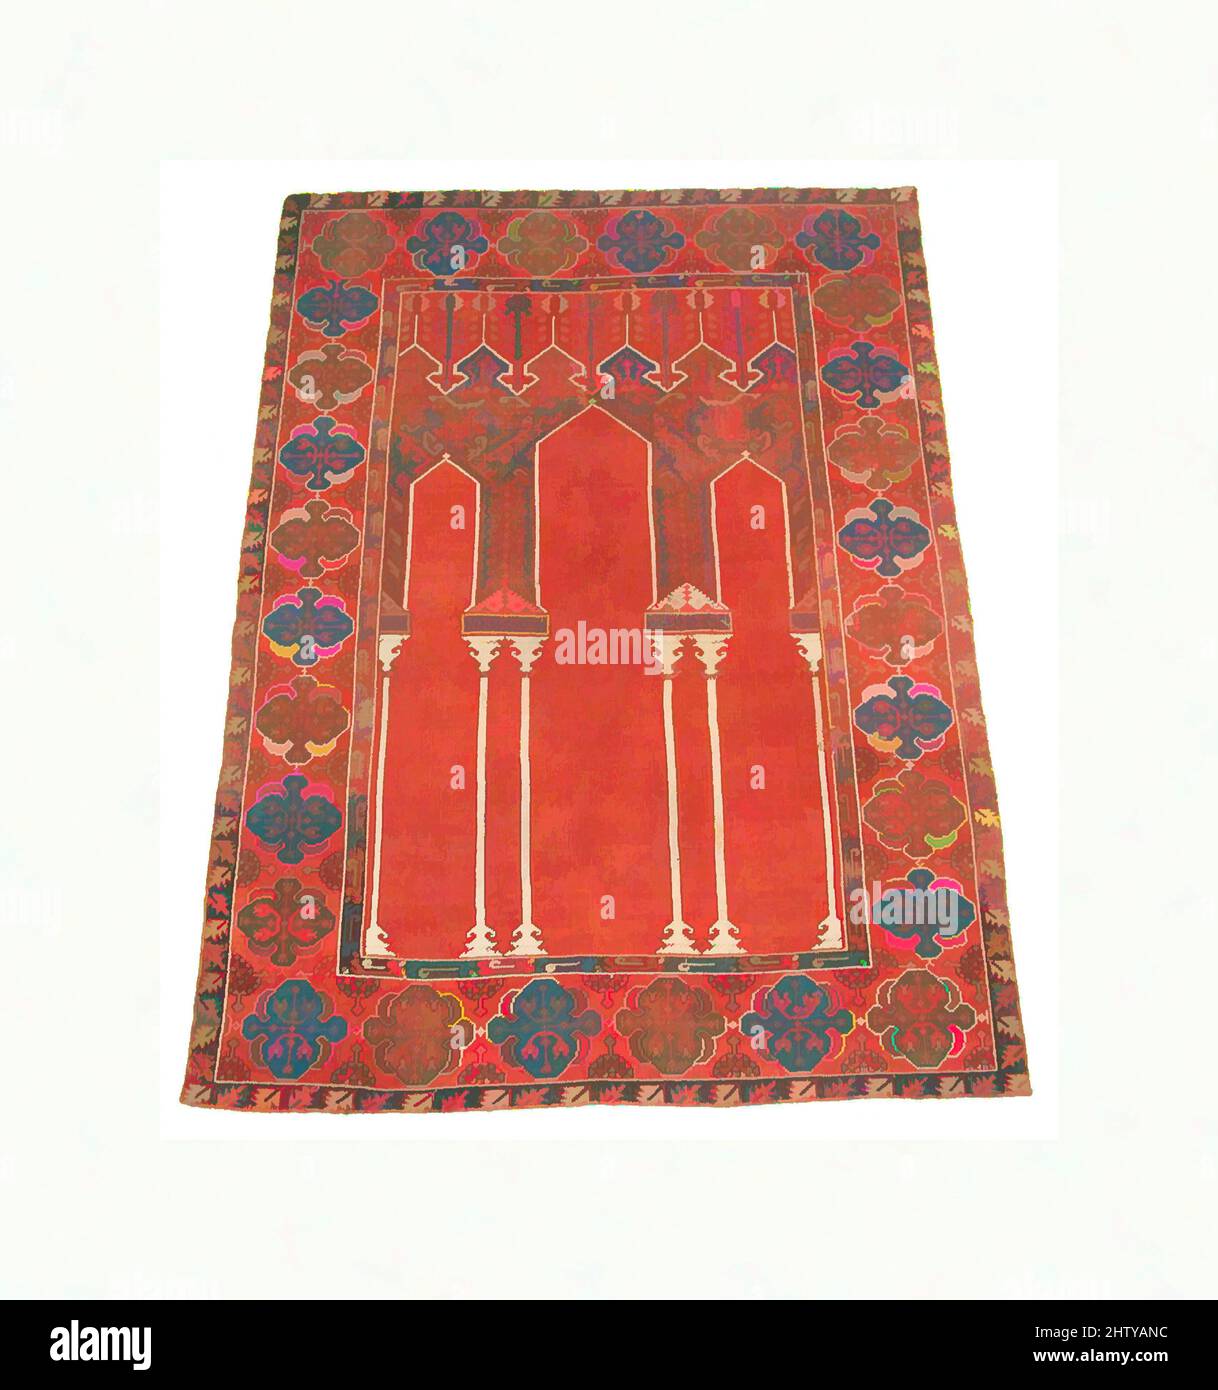 Art inspired by Prayer Rug with Triple Arch Design, 18th century, Attributed to Turkey, Konya, Wool (warp, weft, and pile); symmetrically knotted pile, Rug: L. 62 3/4 in. (159.4 cm), Textiles-Rugs, Prayer rugs or 'seccade' carpets were among the most popular rugs woven in Anatolia, Classic works modernized by Artotop with a splash of modernity. Shapes, color and value, eye-catching visual impact on art. Emotions through freedom of artworks in a contemporary way. A timeless message pursuing a wildly creative new direction. Artists turning to the digital medium and creating the Artotop NFT Stock Photo